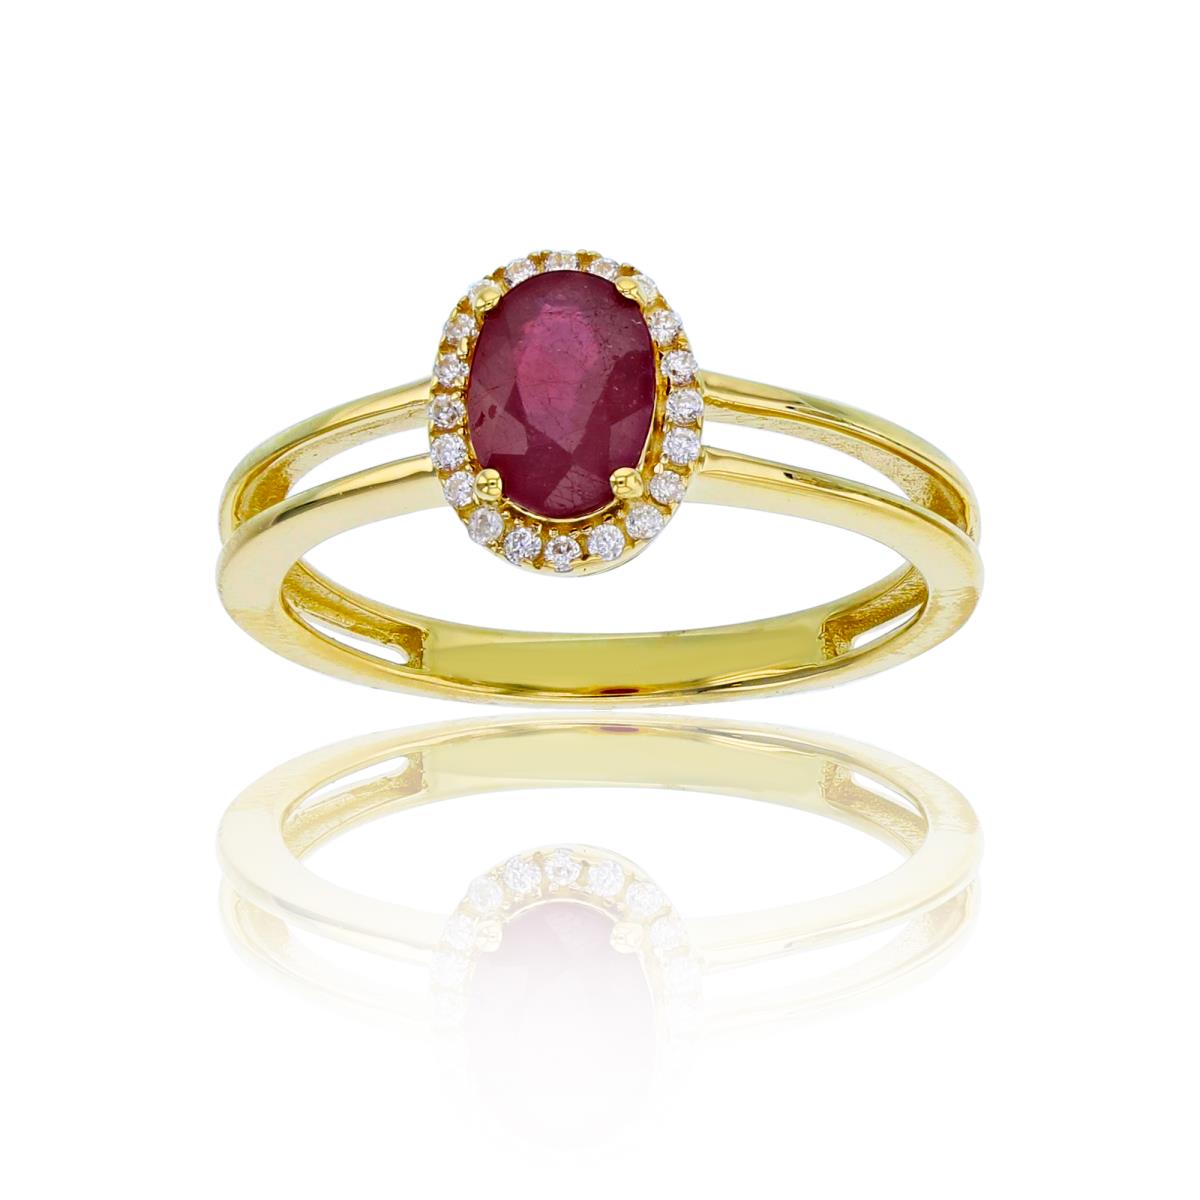 ESTIMATED-10K Yellow Gold 0.10 CTTW Rnd Diam & 7x5mm Ov Glass Filled Ruby Ring